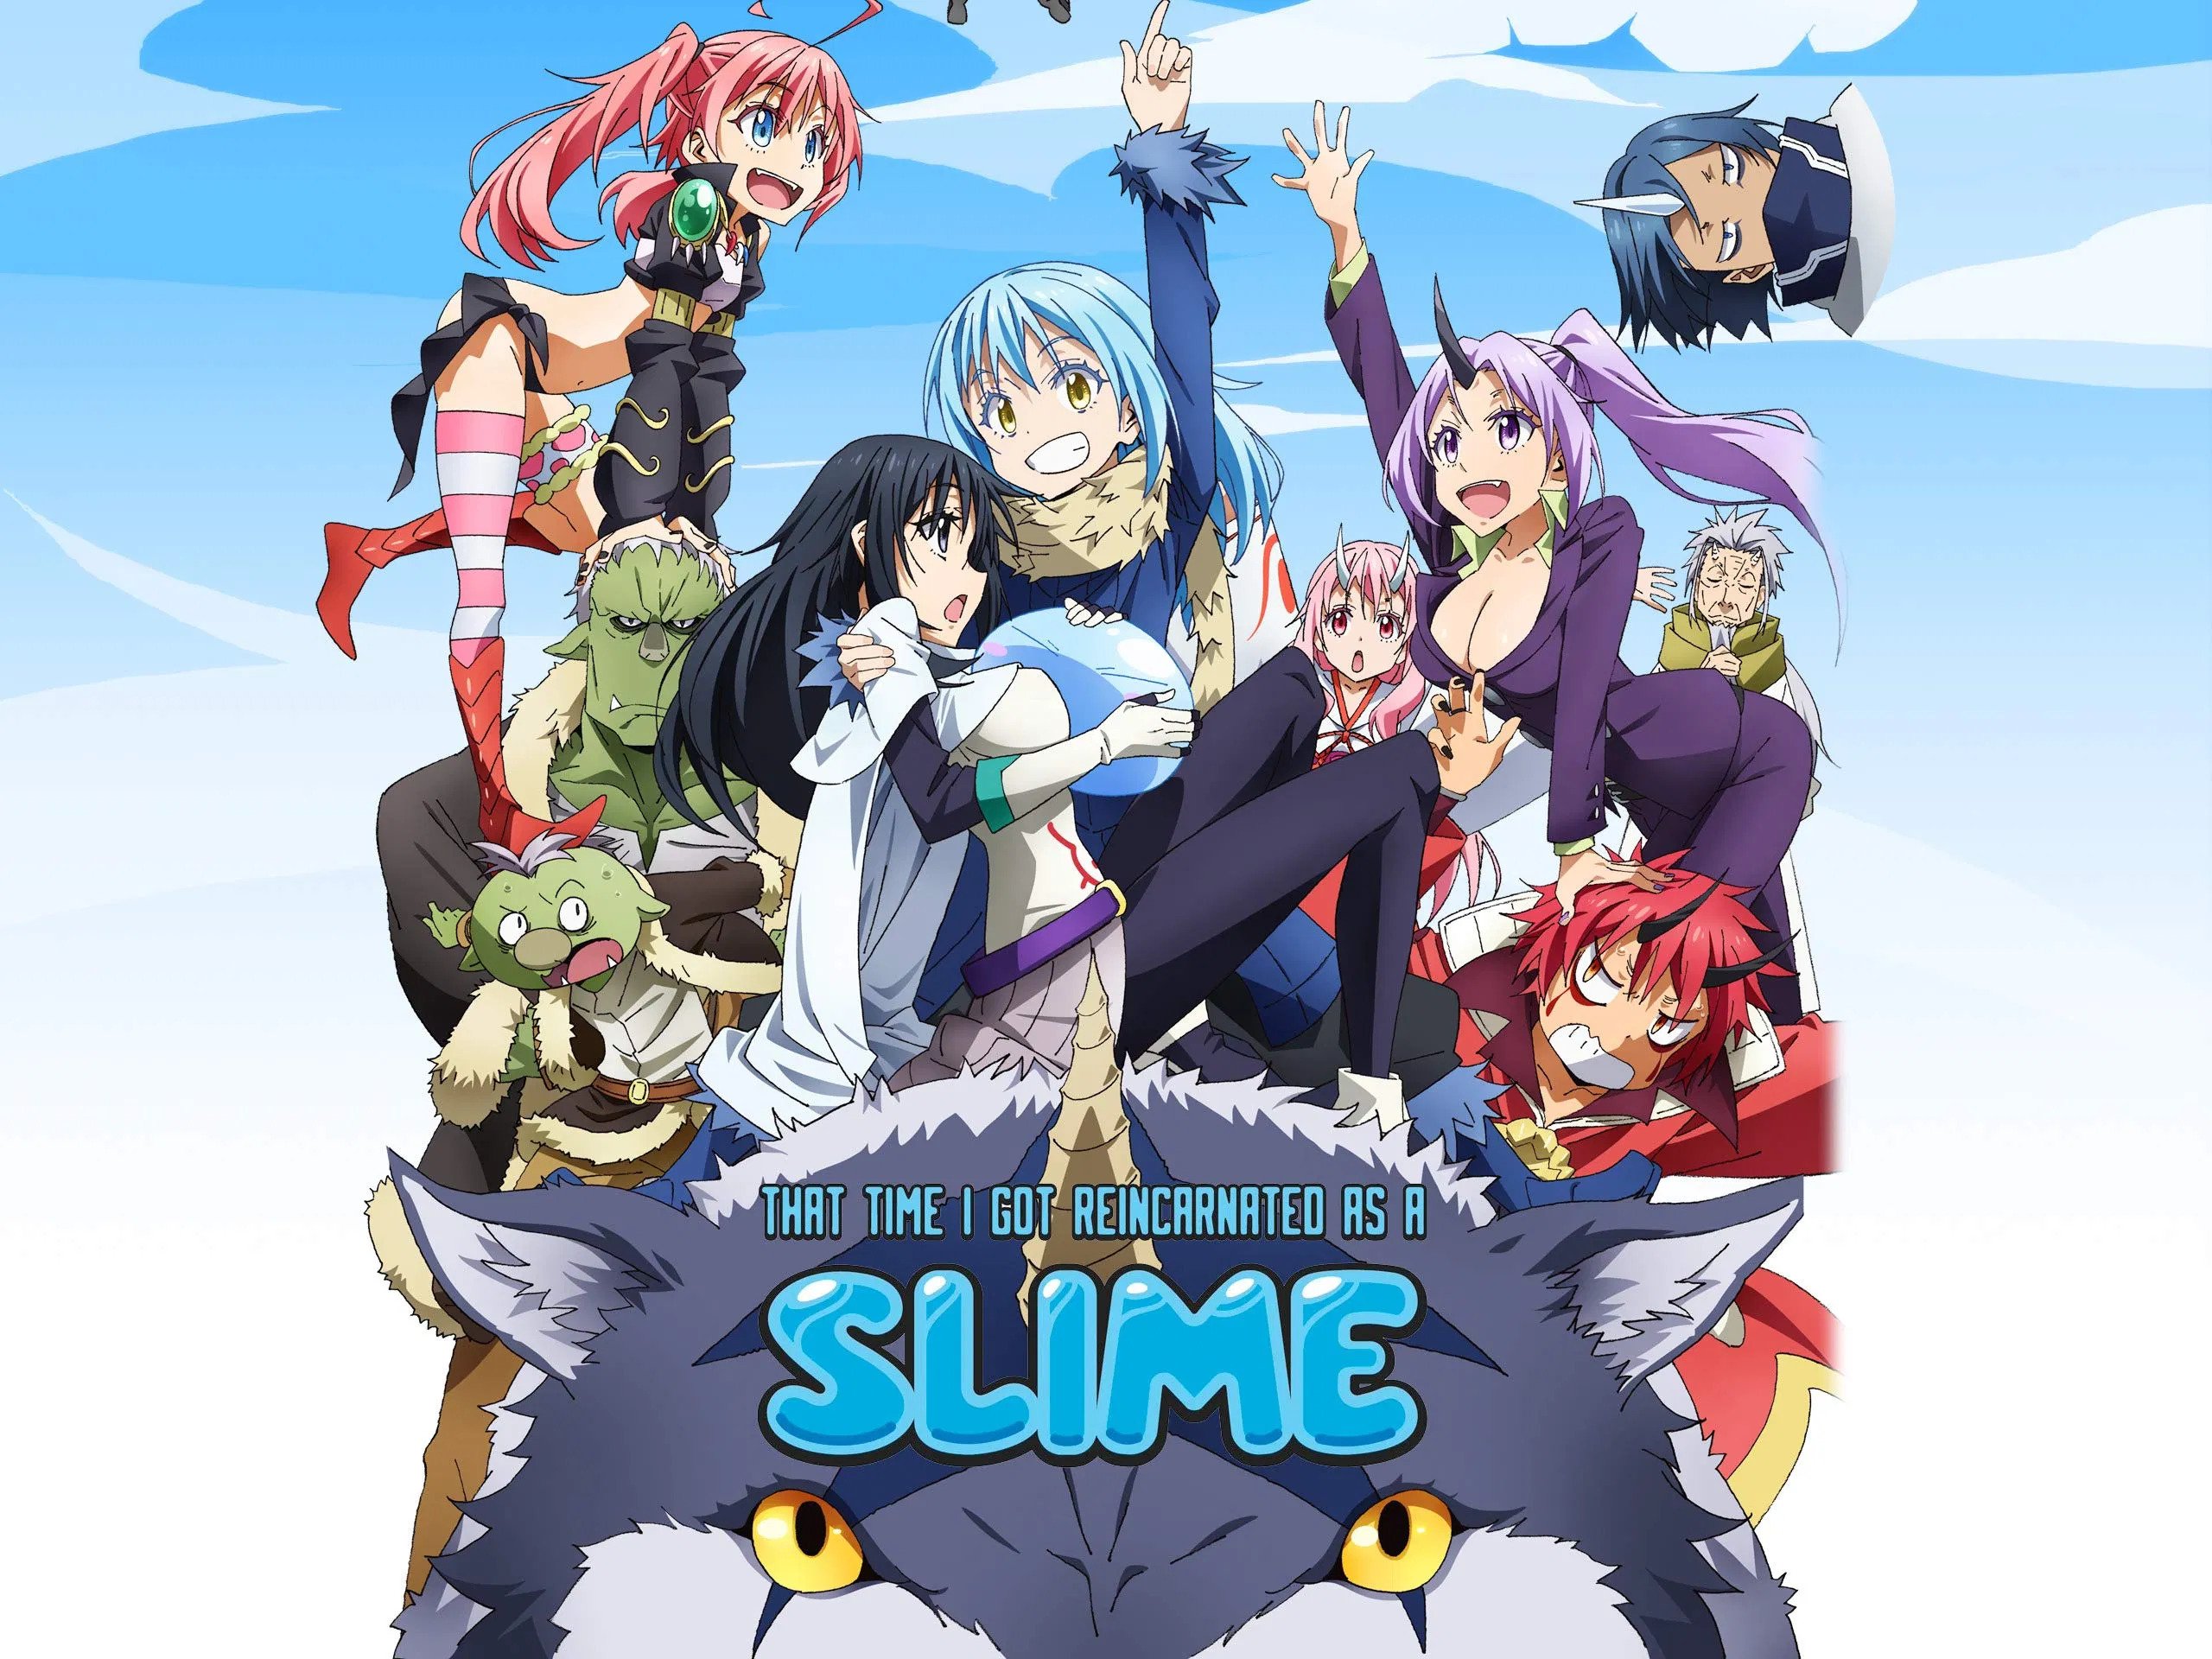 Blue-haired elf girl from "That Time I Got Reincarnated as a Slime" - wide 1